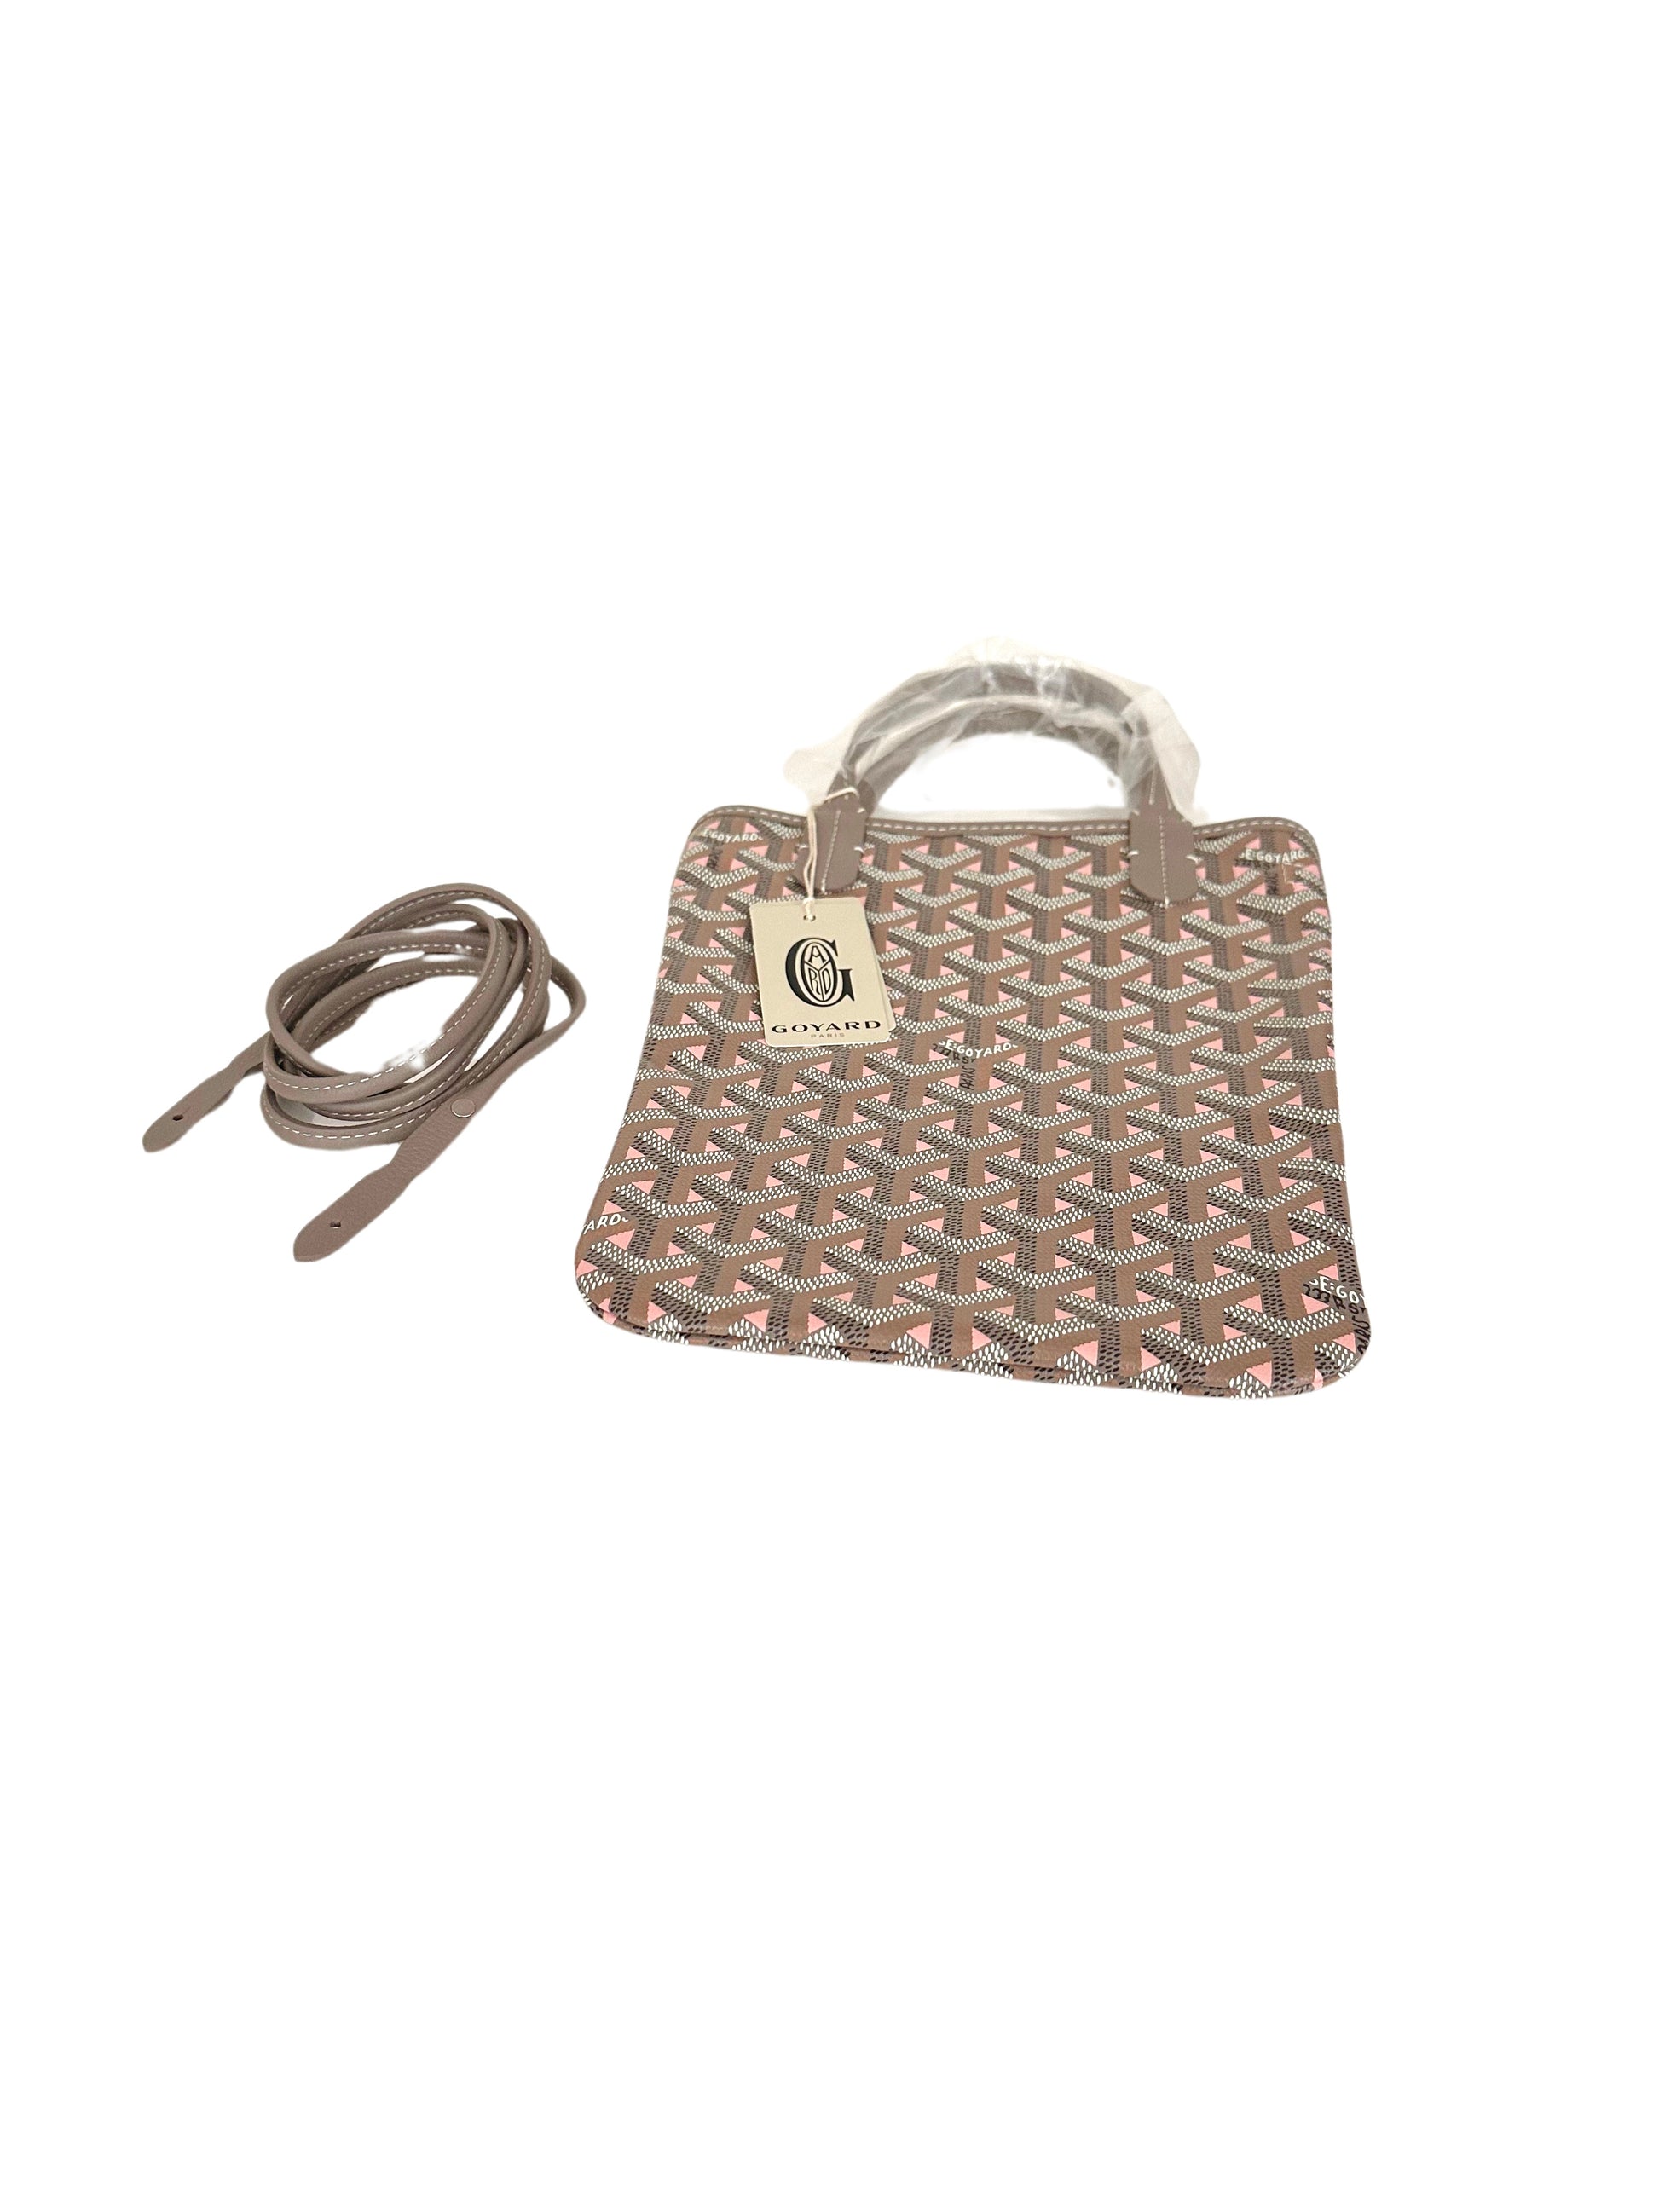 Goyard Poitiers Tote Claire Voie Greige Powdered Pink – The It Bag